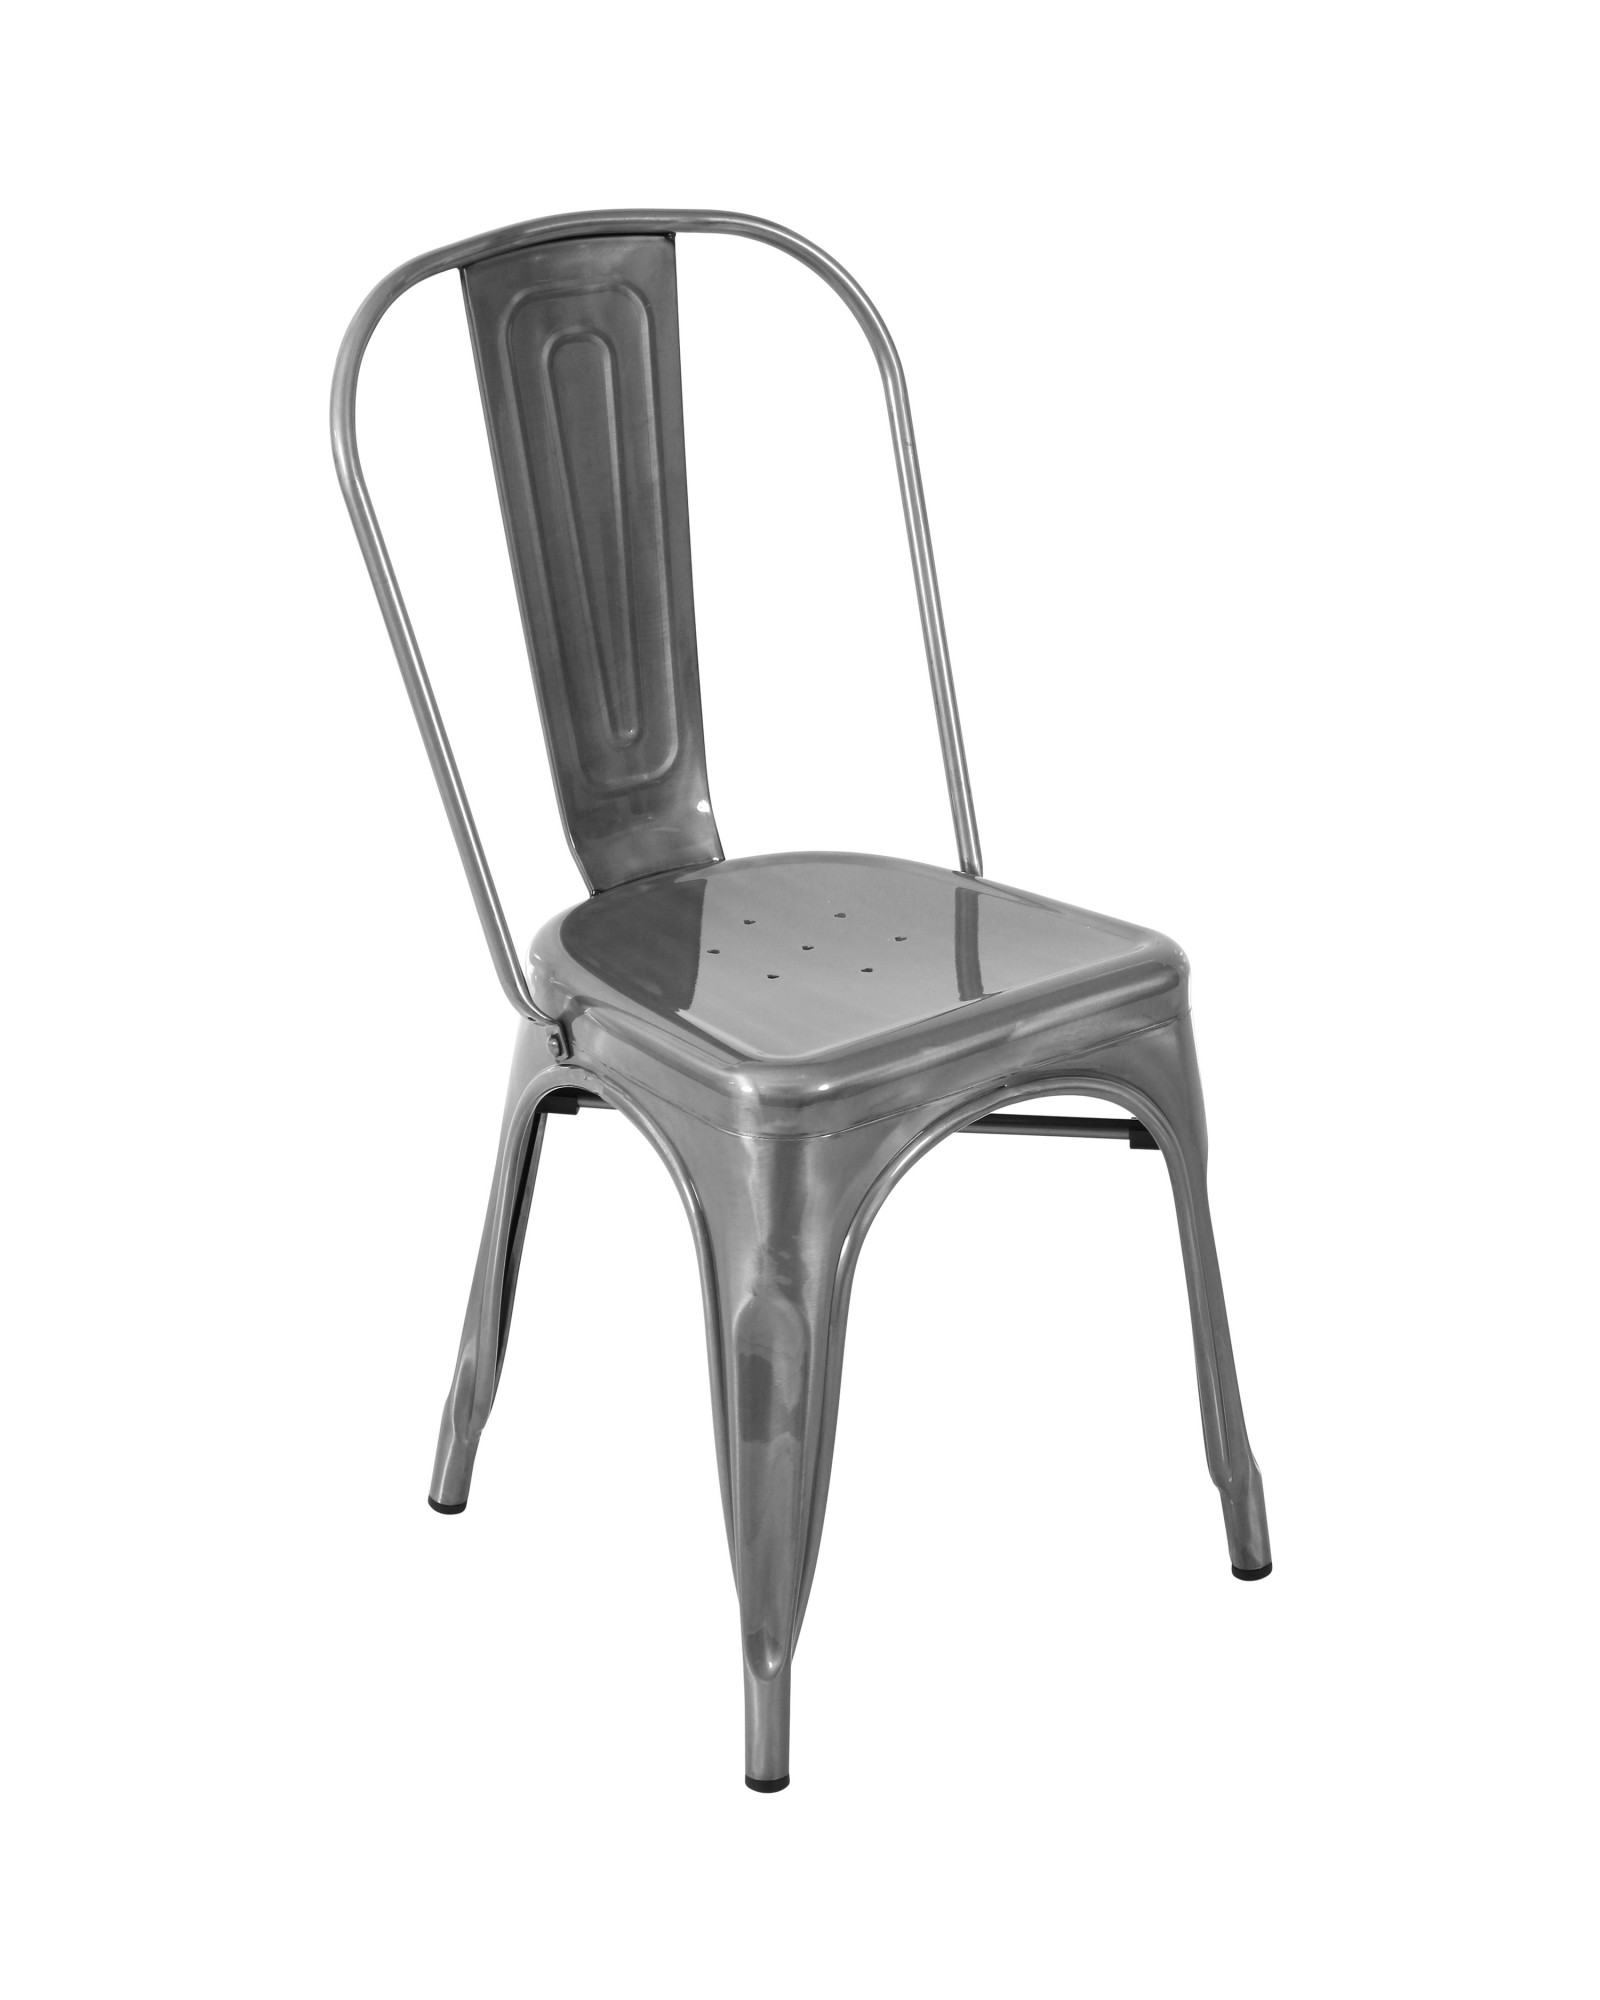 Oregon Industrial Stackable Dining Chair in Brushed Silver - Set of 2